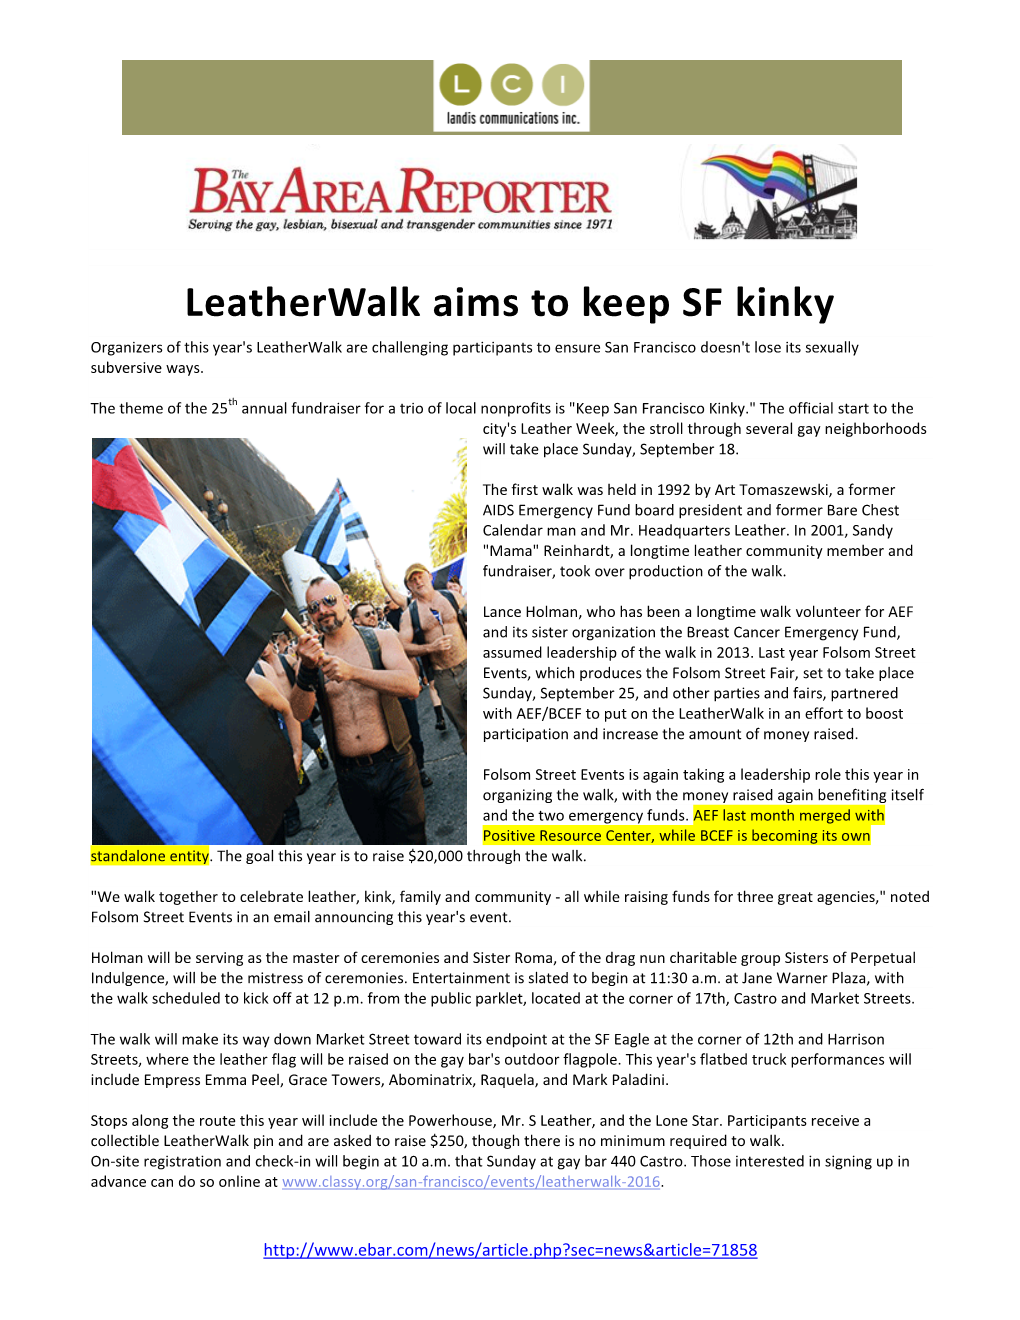 Leatherwalk Aims to Keep SF Kinky Organizers of This Year's Leatherwalk Are Challenging Participants to Ensure San Francisco Doesn't Lose Its Sexually Subversive Ways